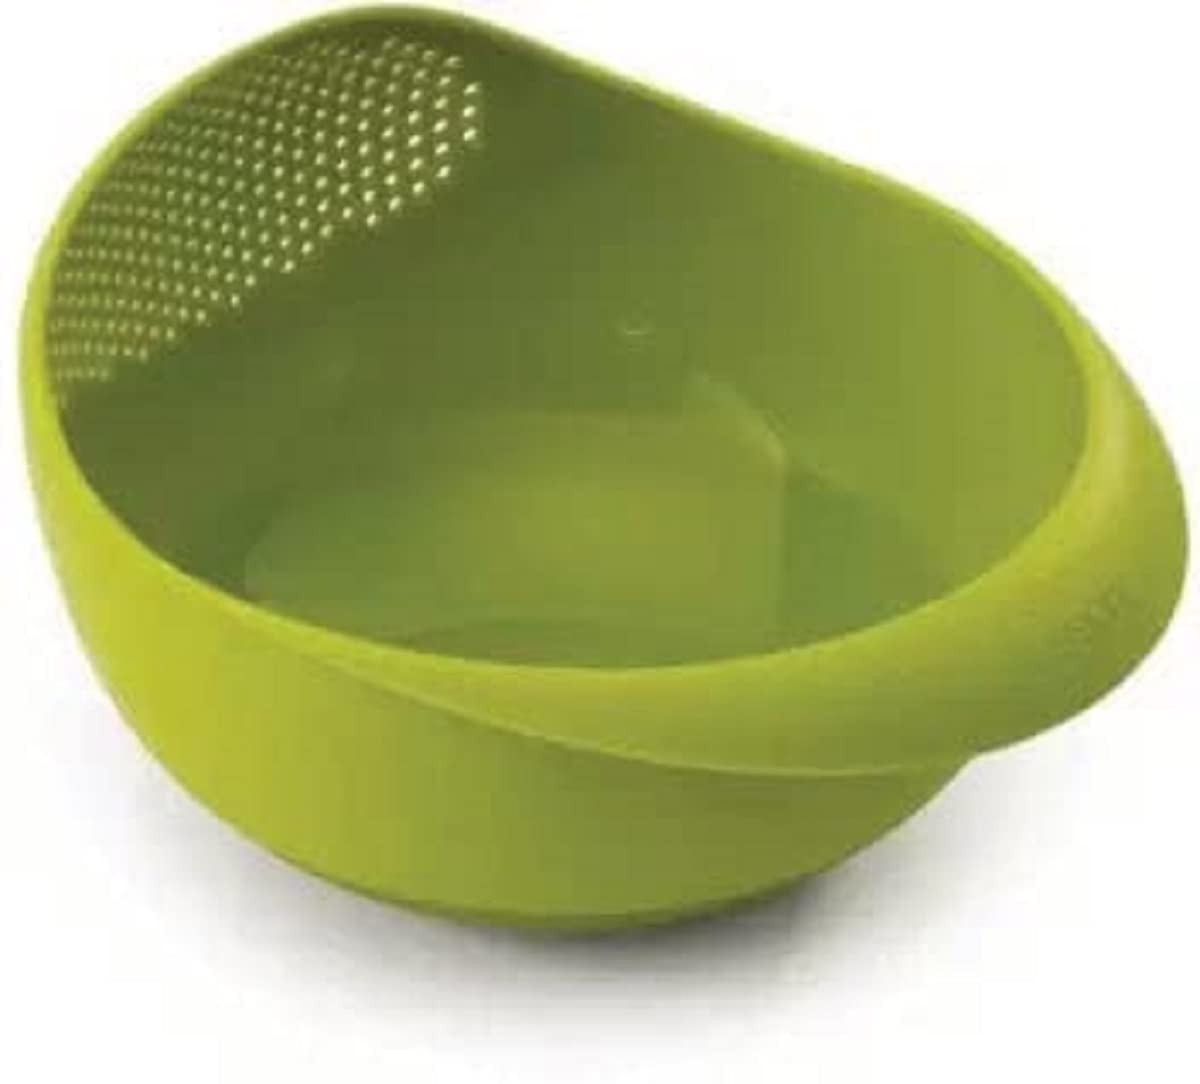 Kuber Industries Colander|Durable Plastic Unbreakable Strainer|BPA Free Washing Bowl for Rice, Pulses, Fruits, Vegetable, Noodles,Pasta Washing Bowl,(Green)